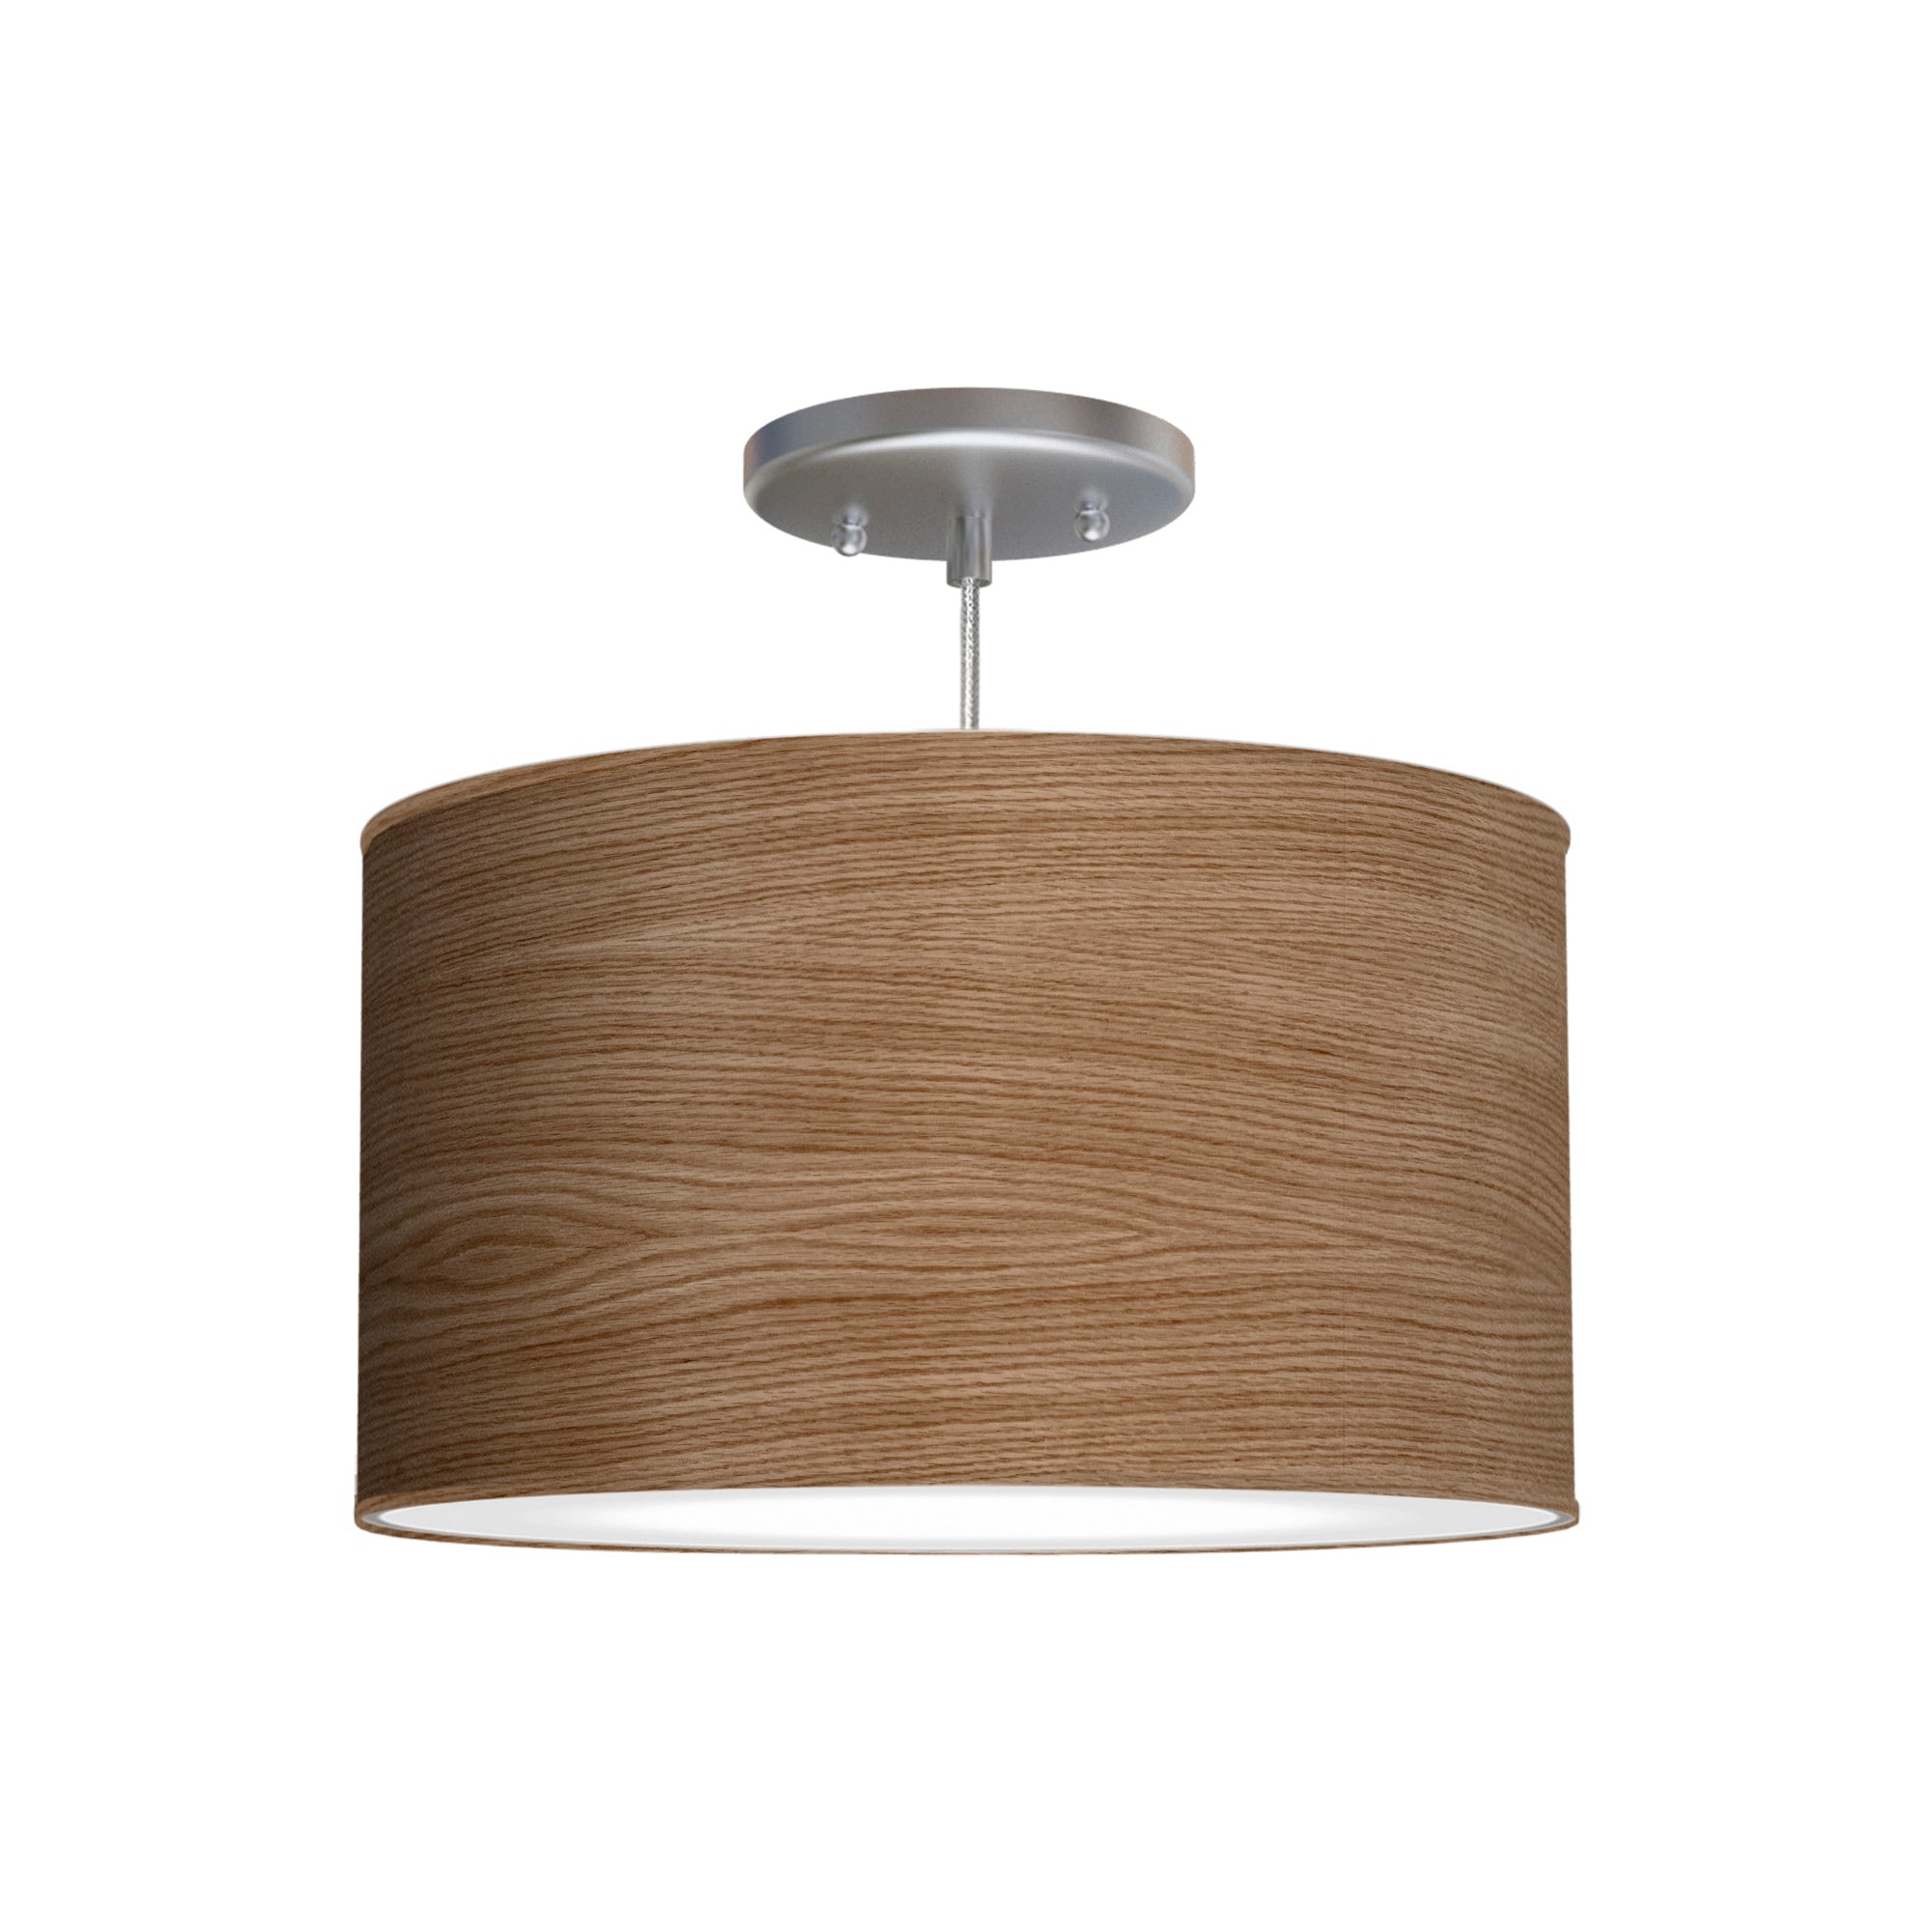 The Gab Hanging Lamp from Seascape Fixtures with a photo veneer shade in walnut color.